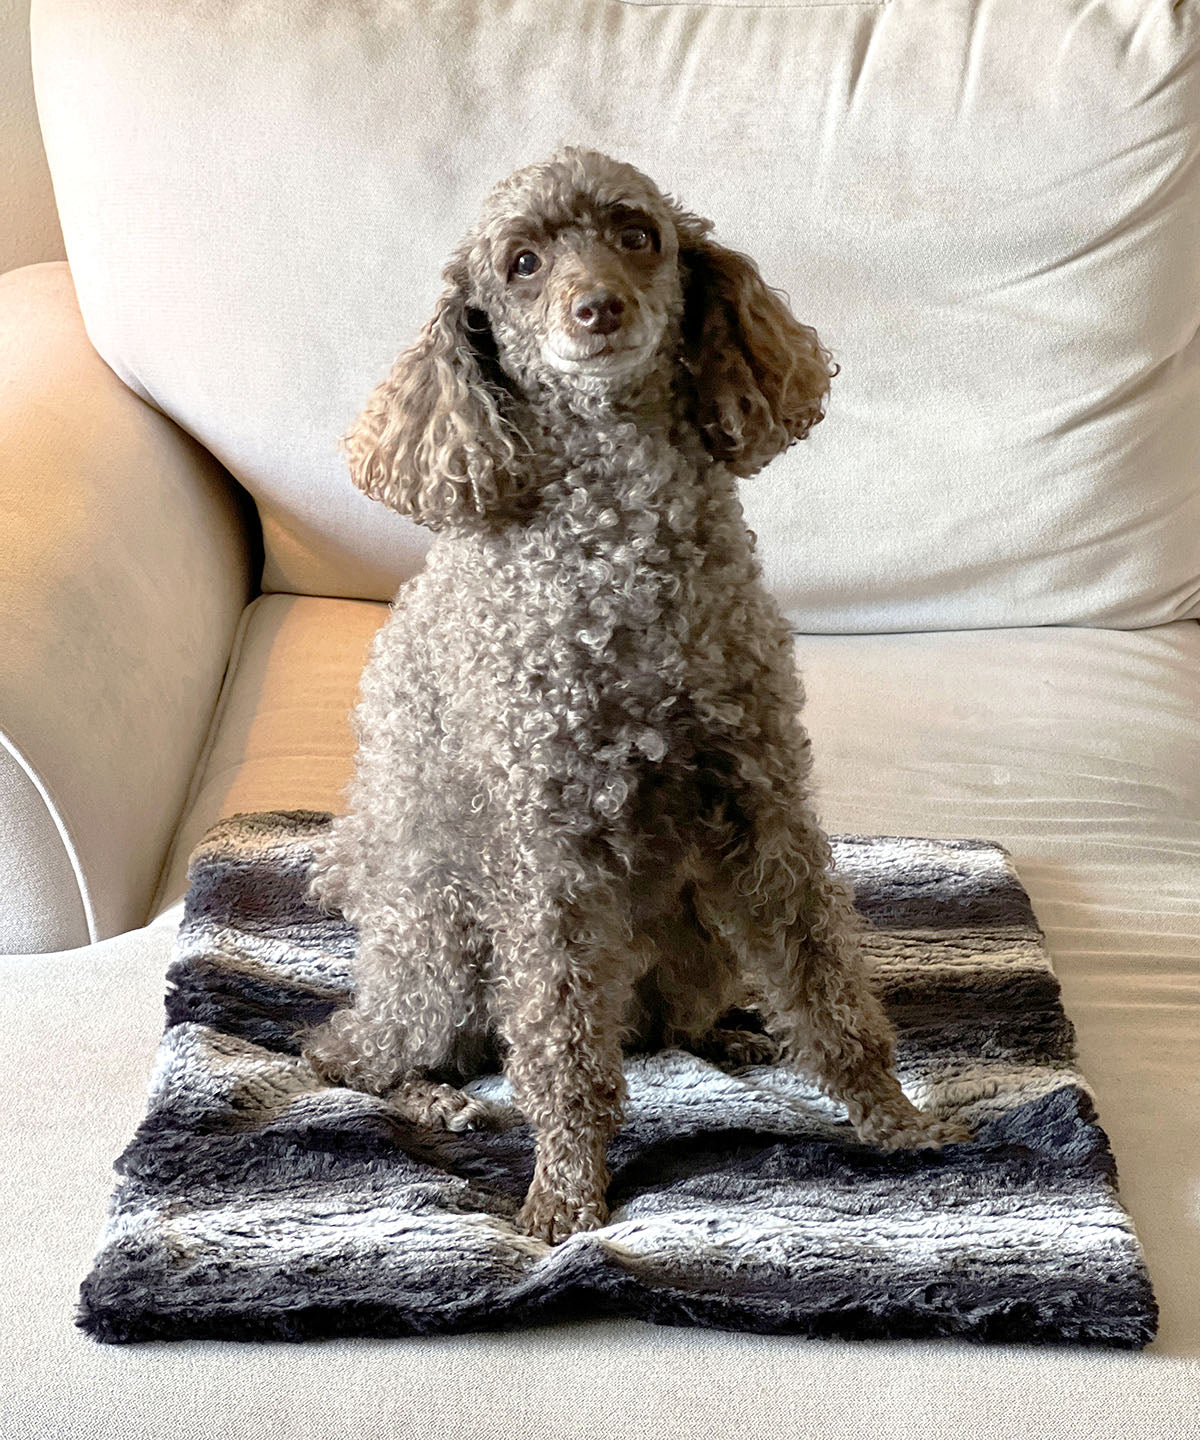 Pet Dog Blanket - Poodle on faux fur throw in Sequoia - Handmade in the USA by Pandemonium Seattle